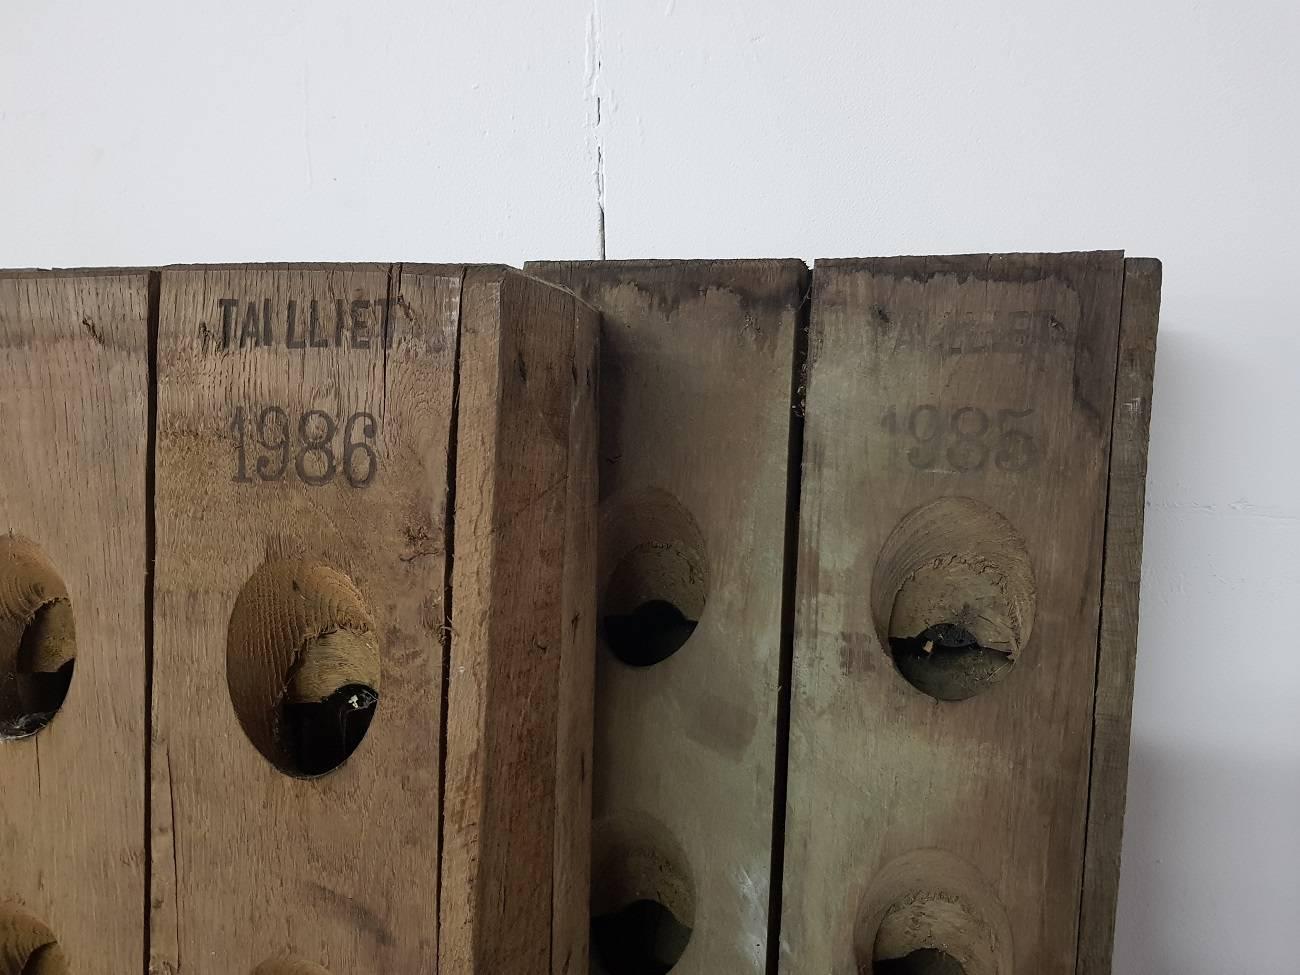 Two original French oak Champagne racks made by the French Company Tailliet both dated with 1985 and 1986, the can hold up 120 bottles of champagne and these are not used a lot.

The measurements are,
Depth 140 cm max/ 55.1 inch max. They can